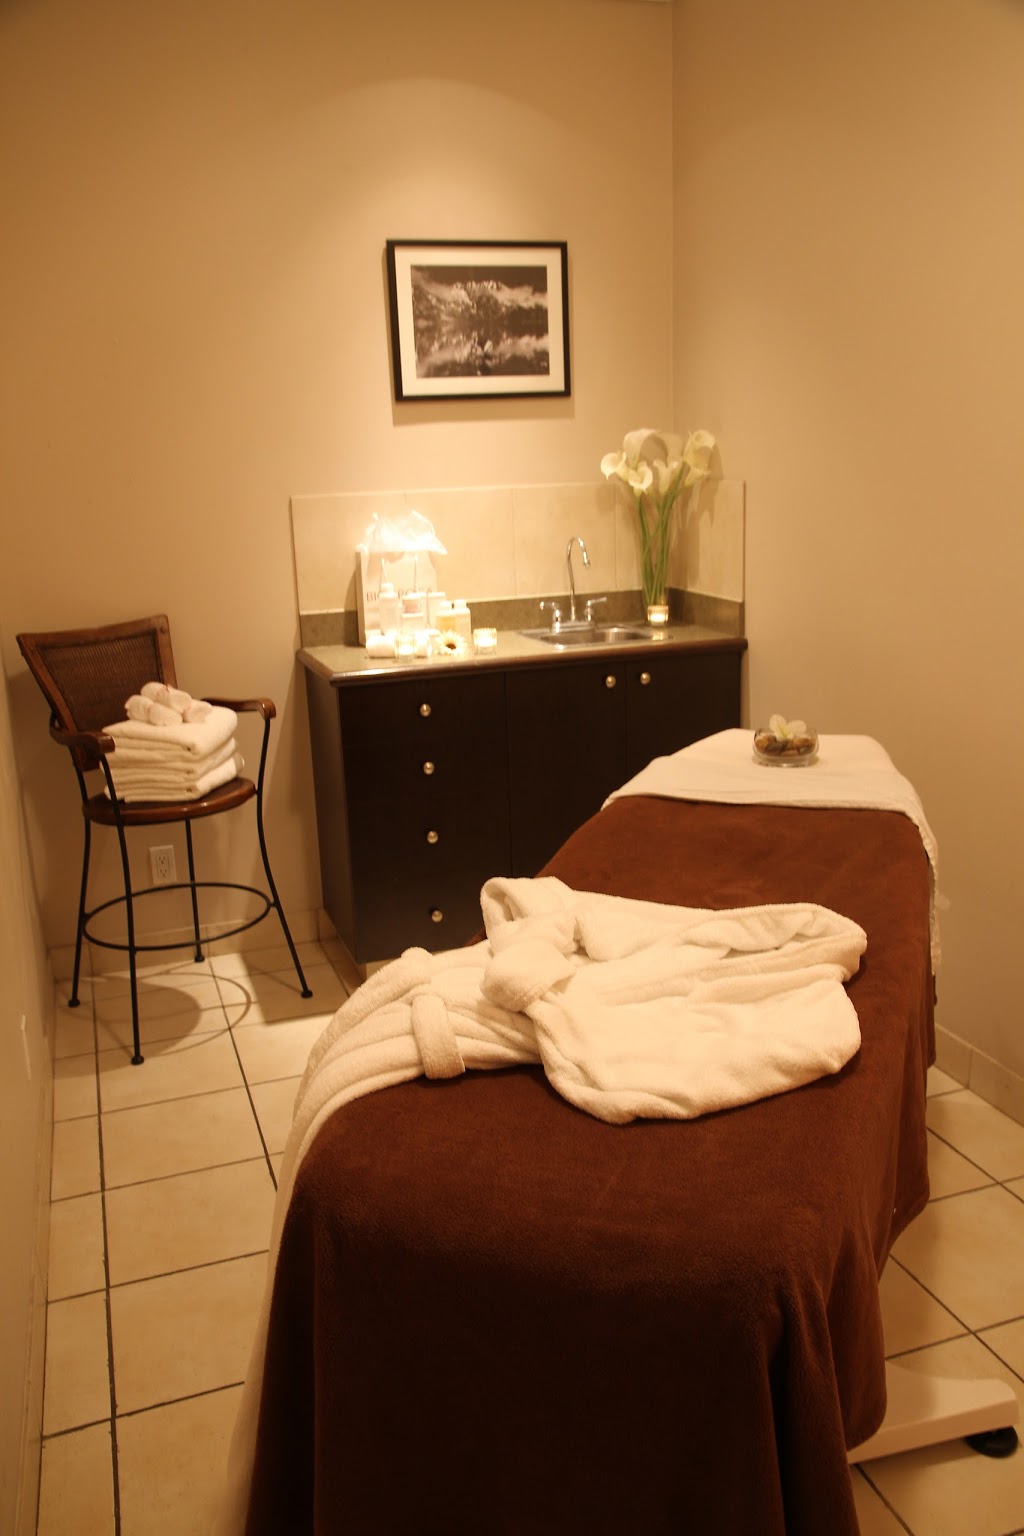 The Facial Place | 1084 Salk Rd #4, Pickering, ON L1W 4B6, Canada | Phone: (905) 831-9700